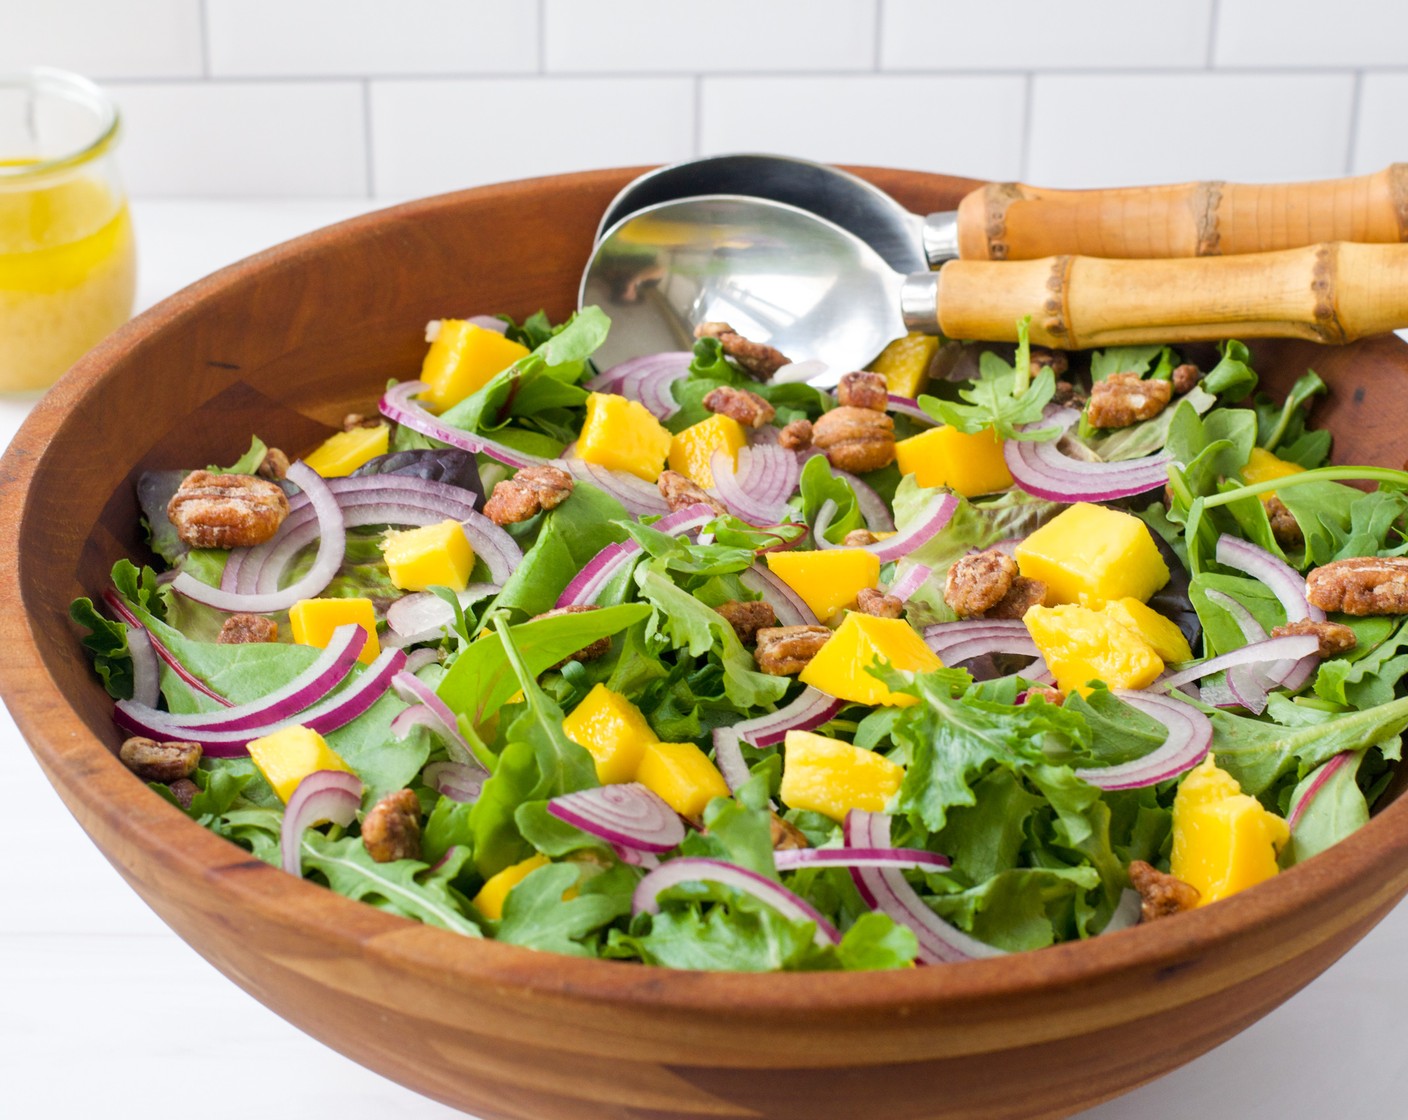 step 5 While the chicken is cooking, assemble the salad. Place the Baby Greens (9 1/2 cups) in a large bowl. Top with Mango (1), Red Onion (1/2), and Candied Pecans (1 cup). Dress the salad and toss gently to combine. Divide the salad among four dinner plates.